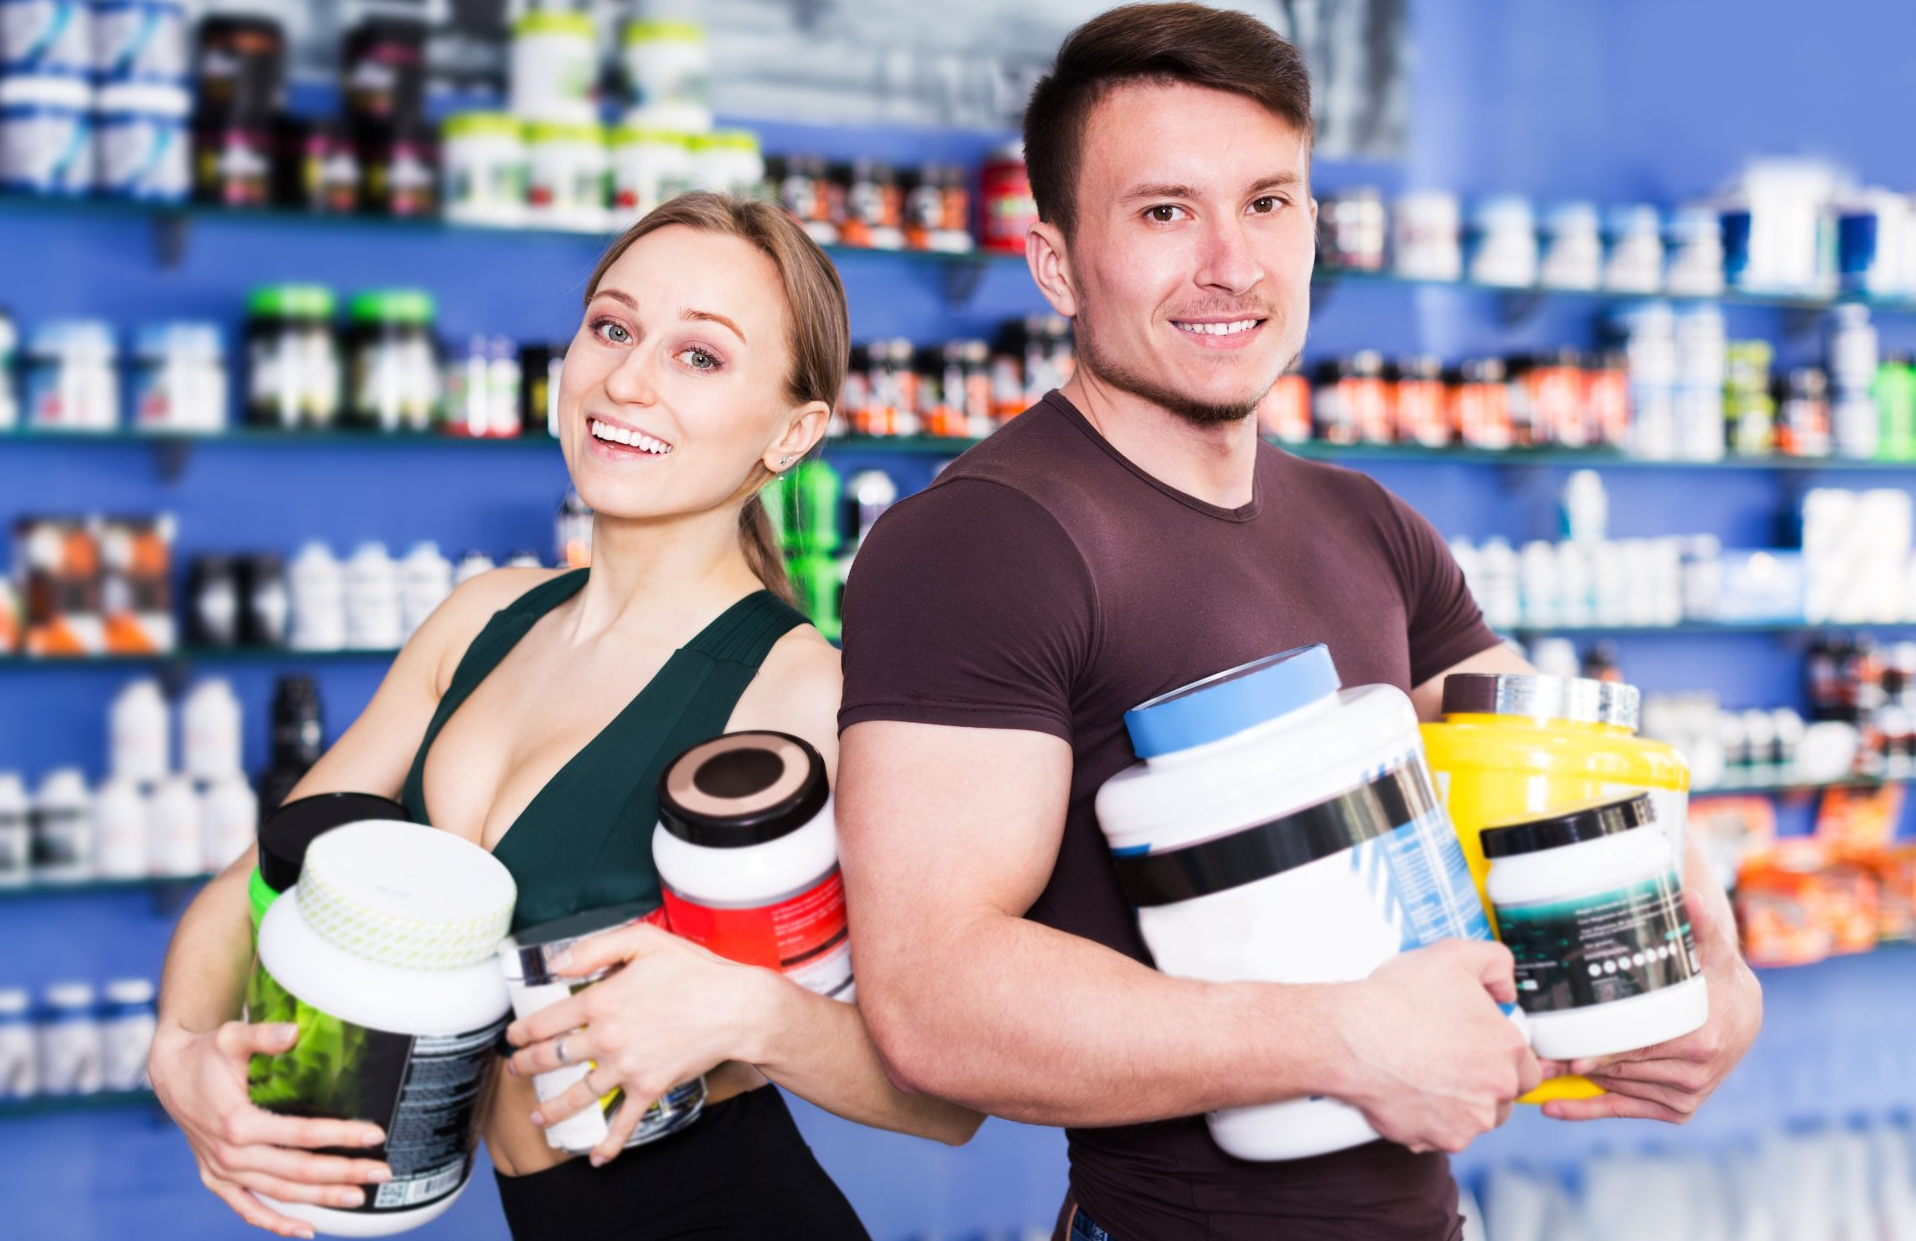 A man and a woman are holding protein powders in a store.